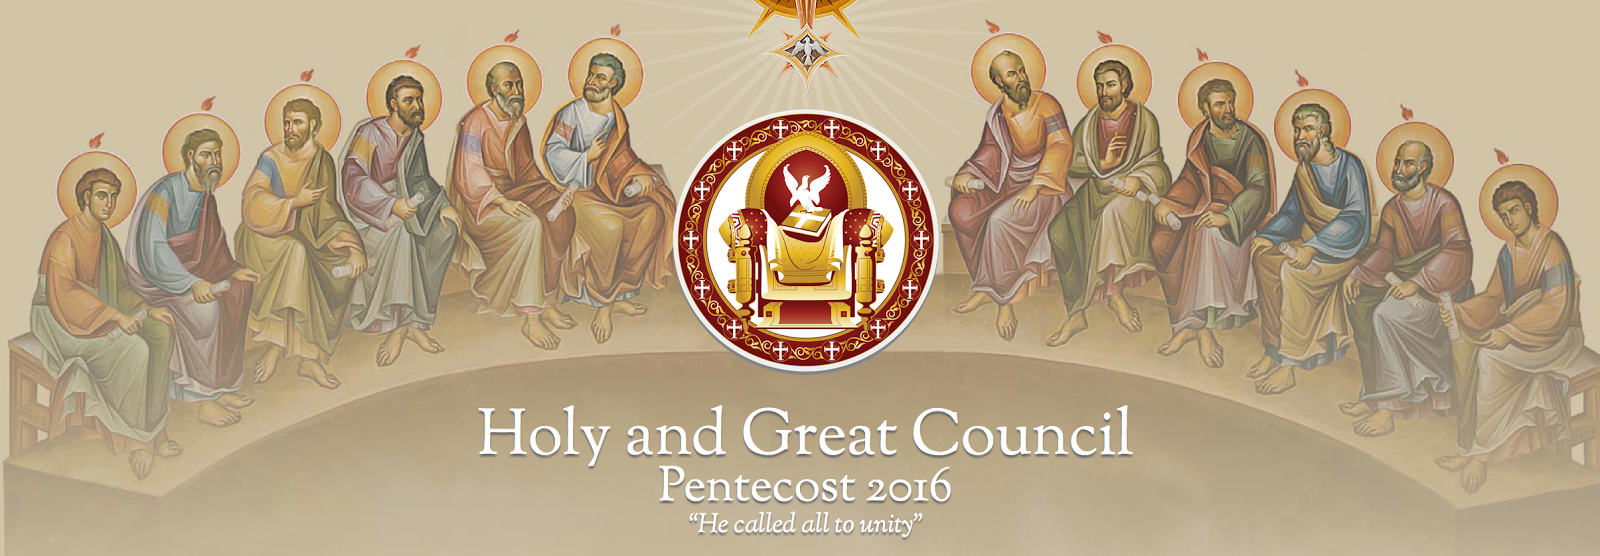 Holy and Great Council 2016 